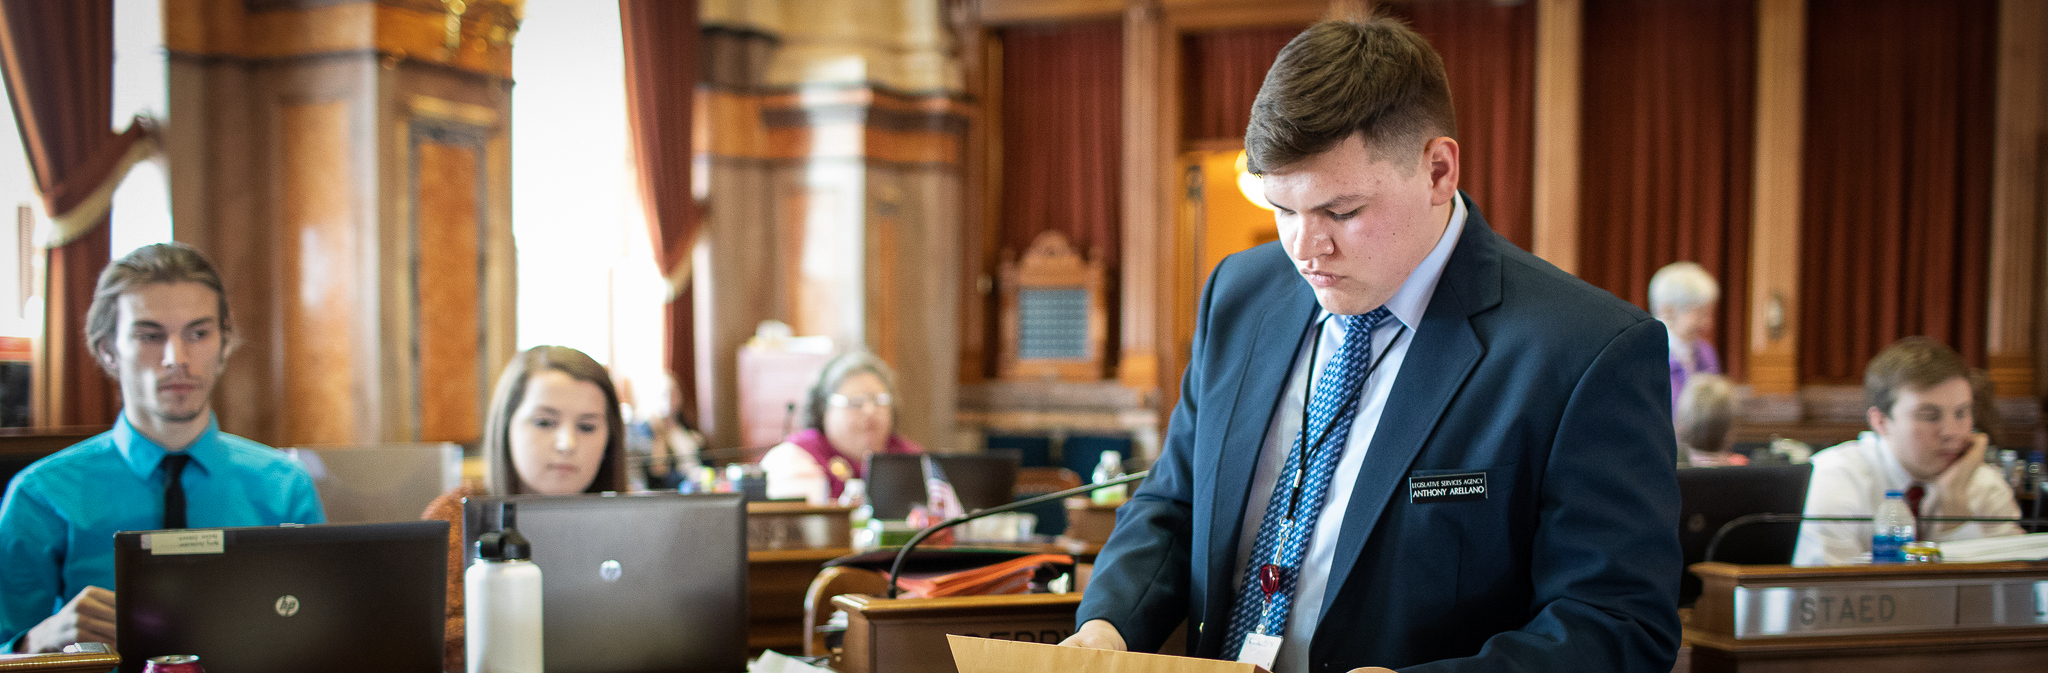 Senior Writes Another Page in East’s Legislative Tradition